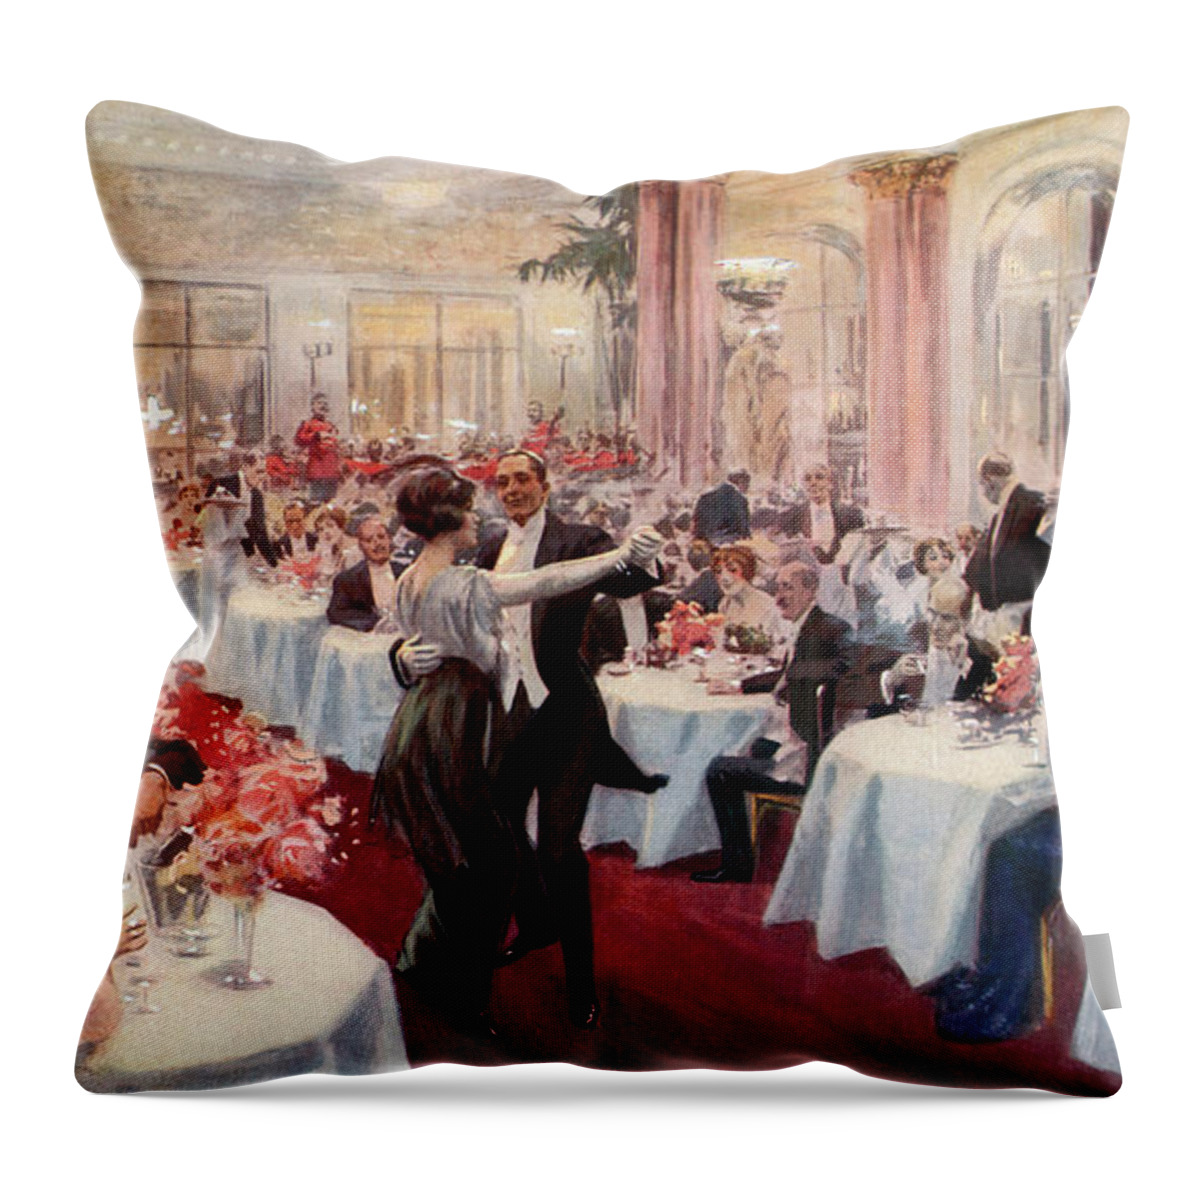 Supper Scene At The Savoy Throw Pillow featuring the painting Supper Scene at the Savoy by English School